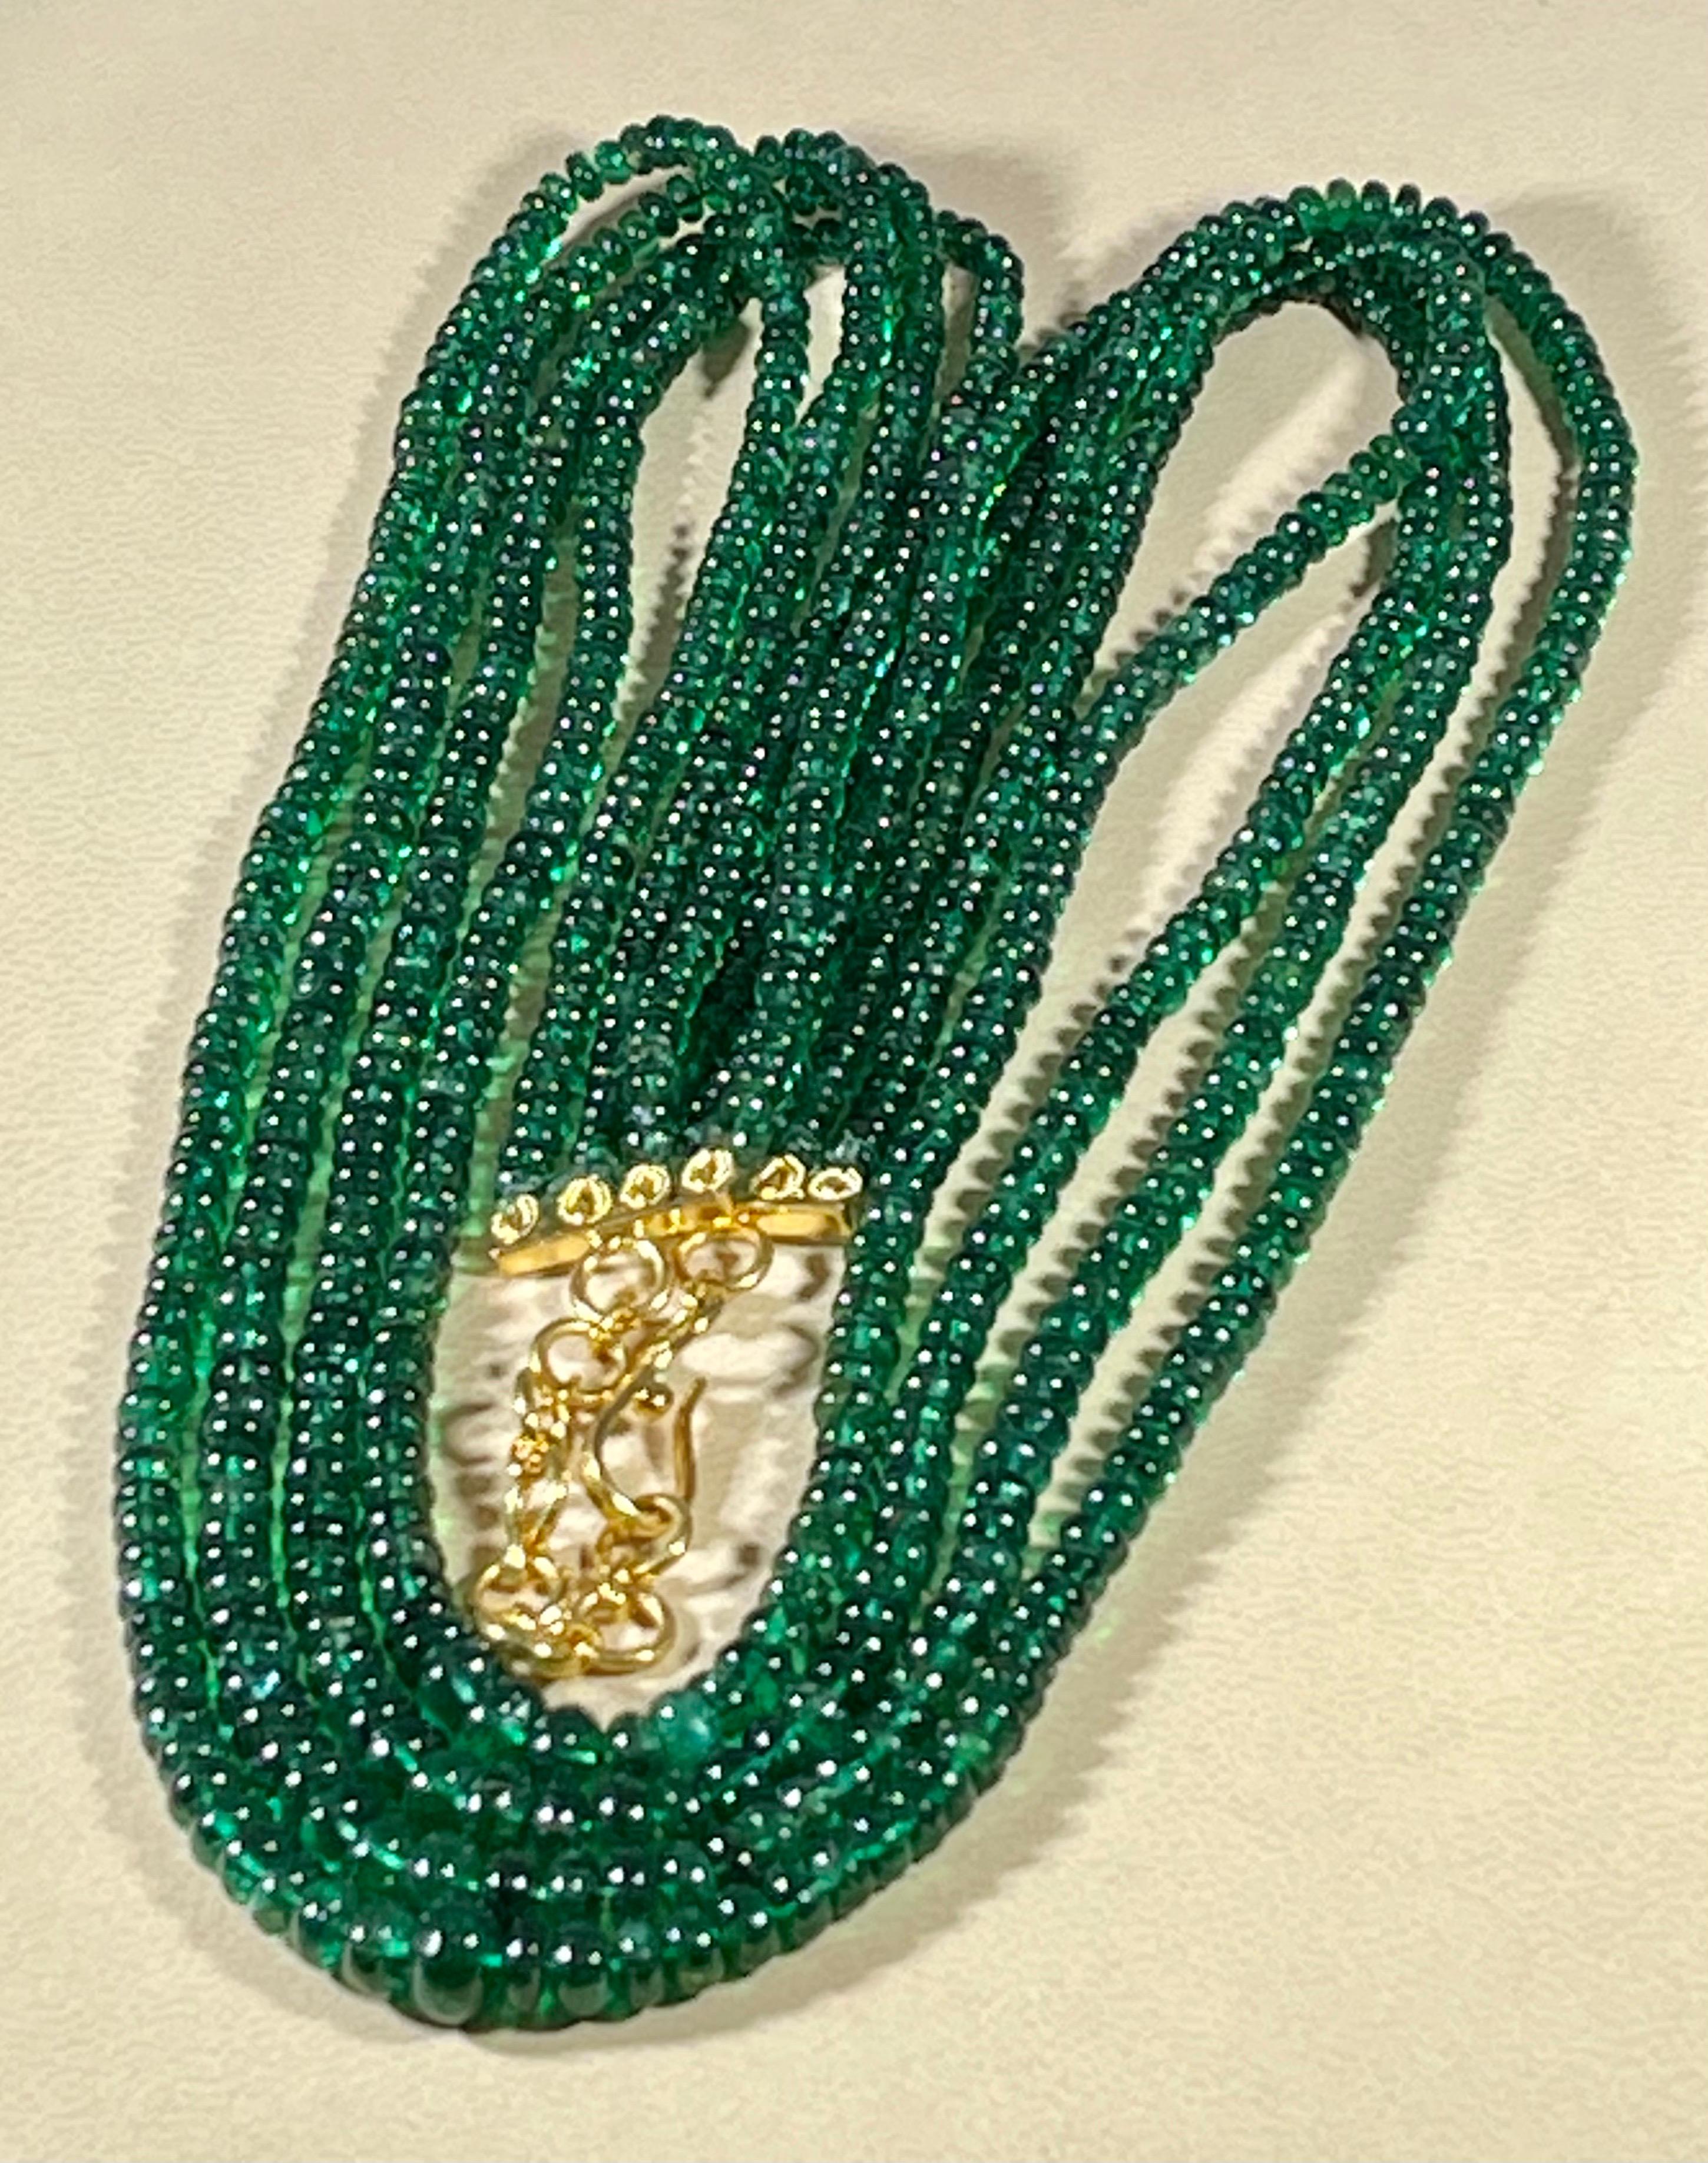 250ct Fine Emerald Beads 4 Line Necklace with 14 Kt Yellow Gold Clasp Adjustable For Sale 6